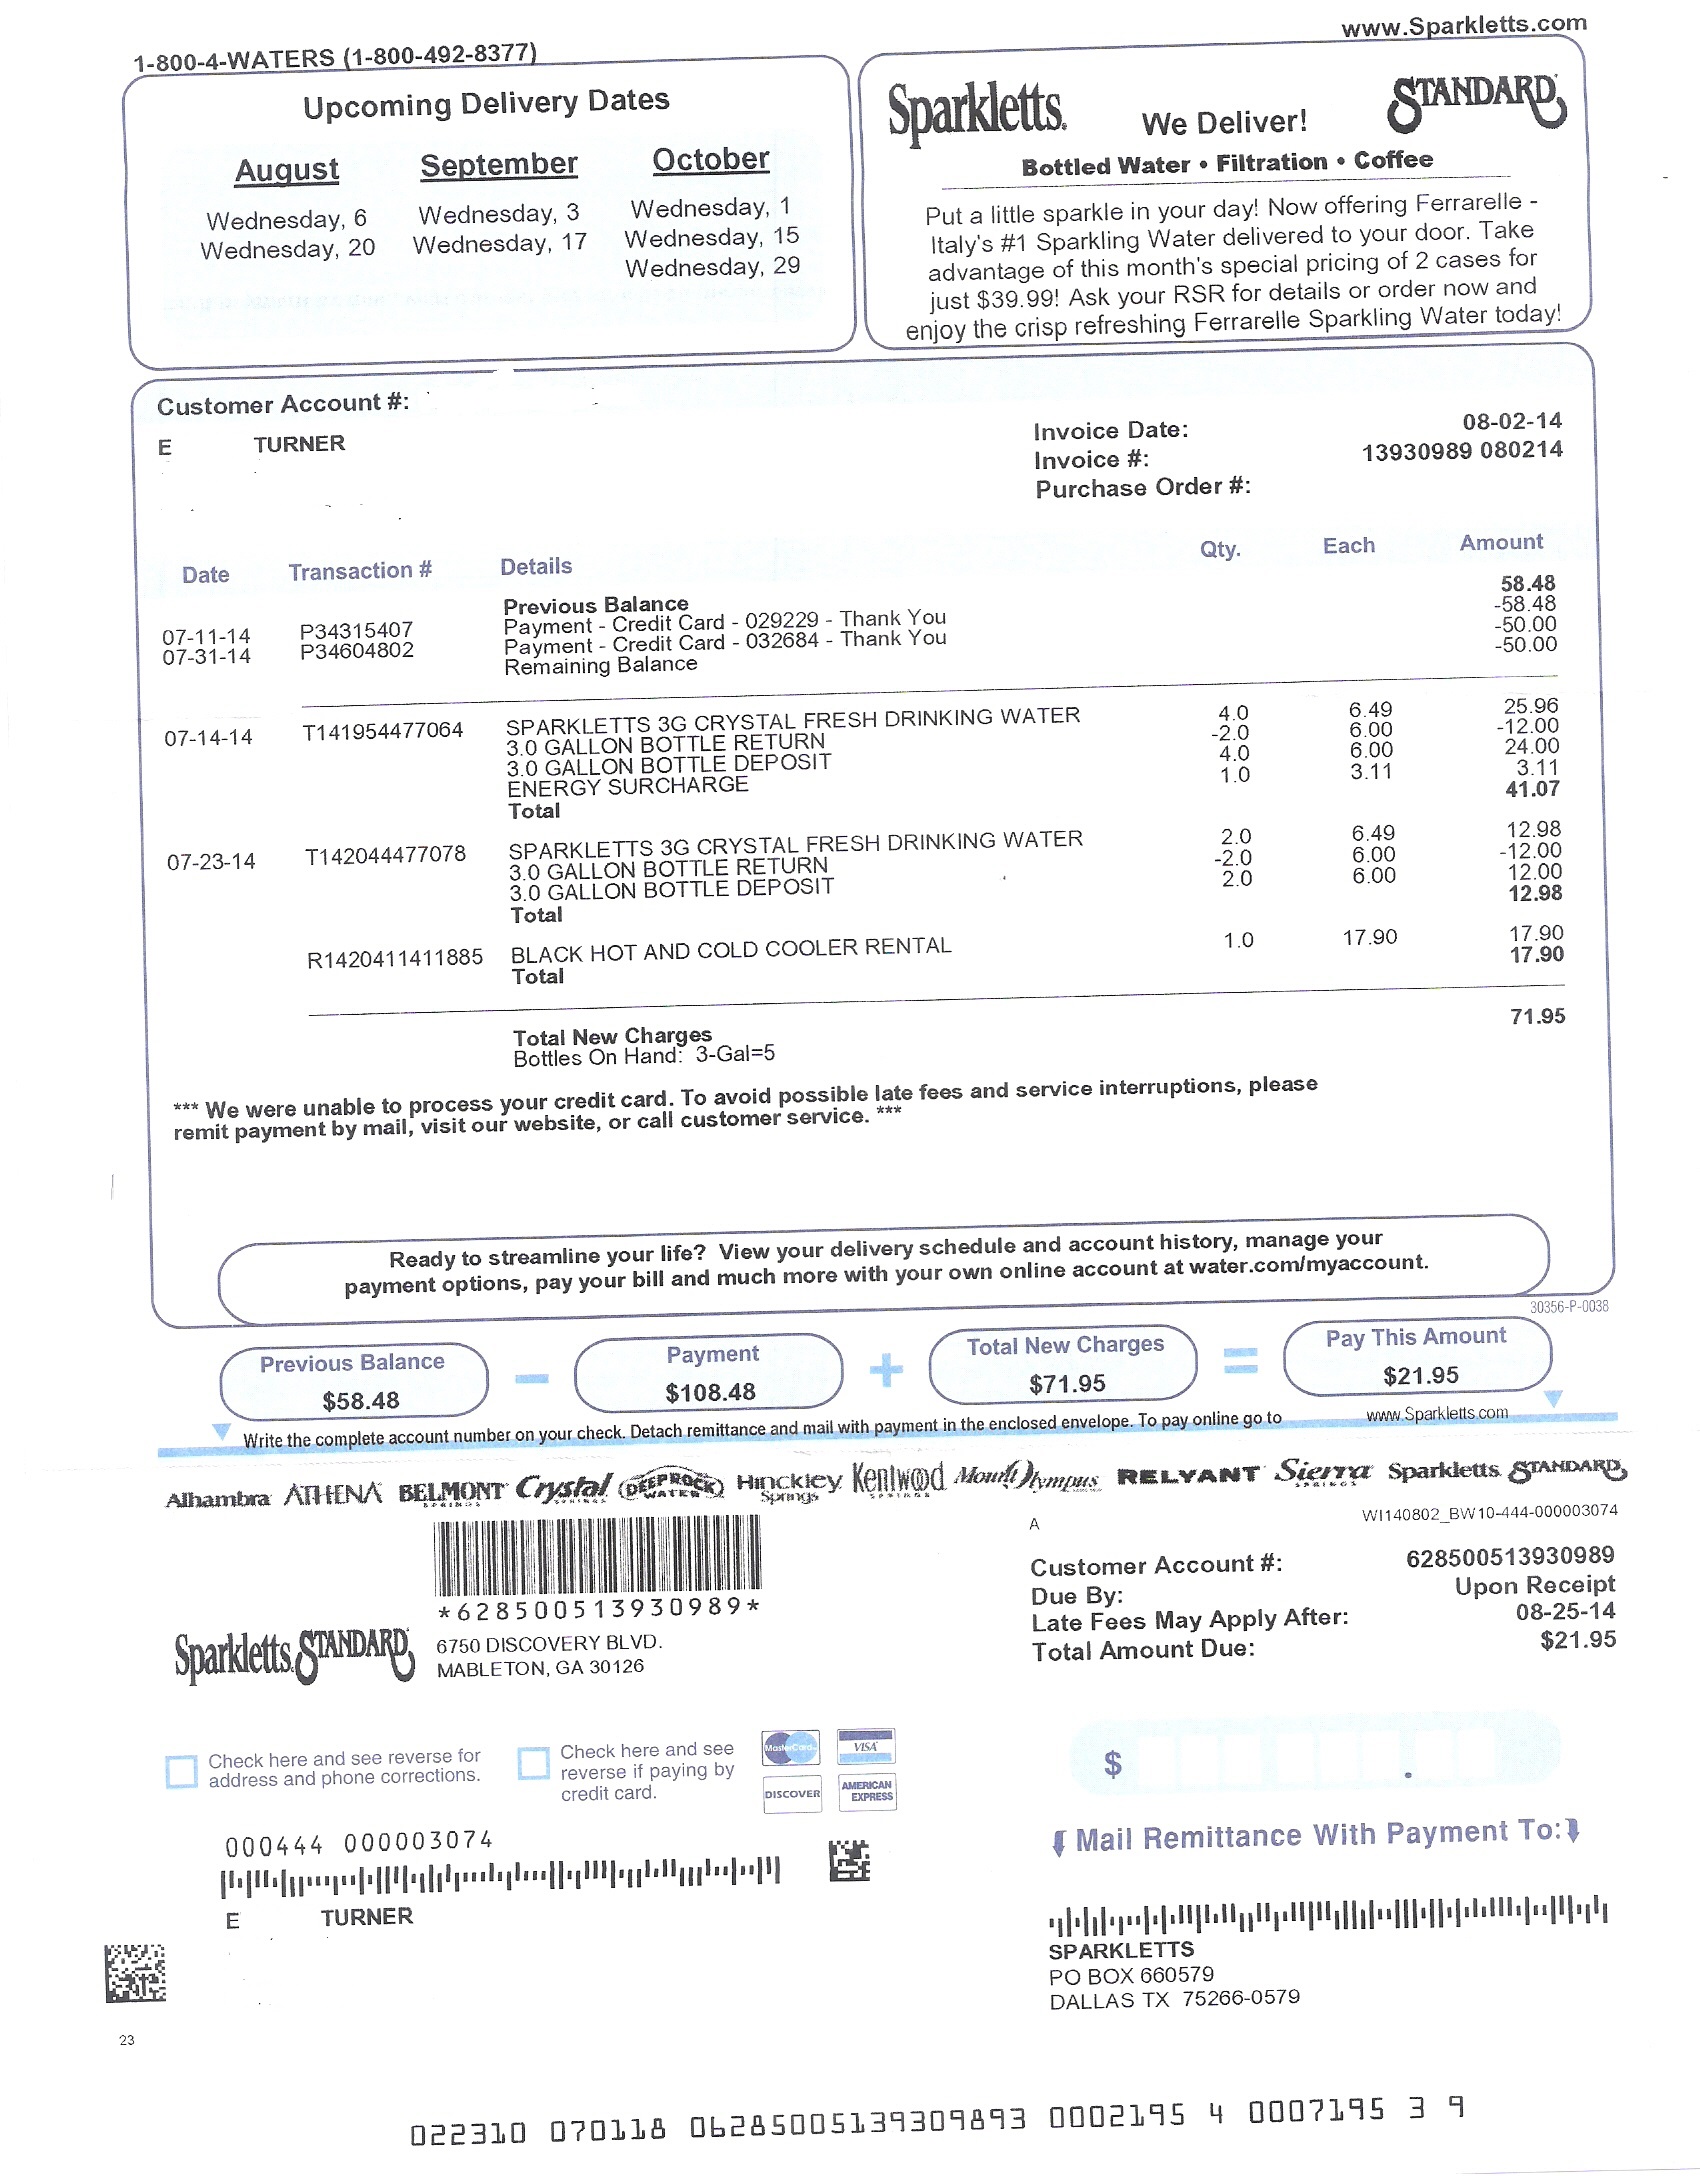 This is my invoice showing when I began service and how much I have been charged. You can clearly see over billing on the bottle deposits as well as the fact that I have been charged over $100 for les